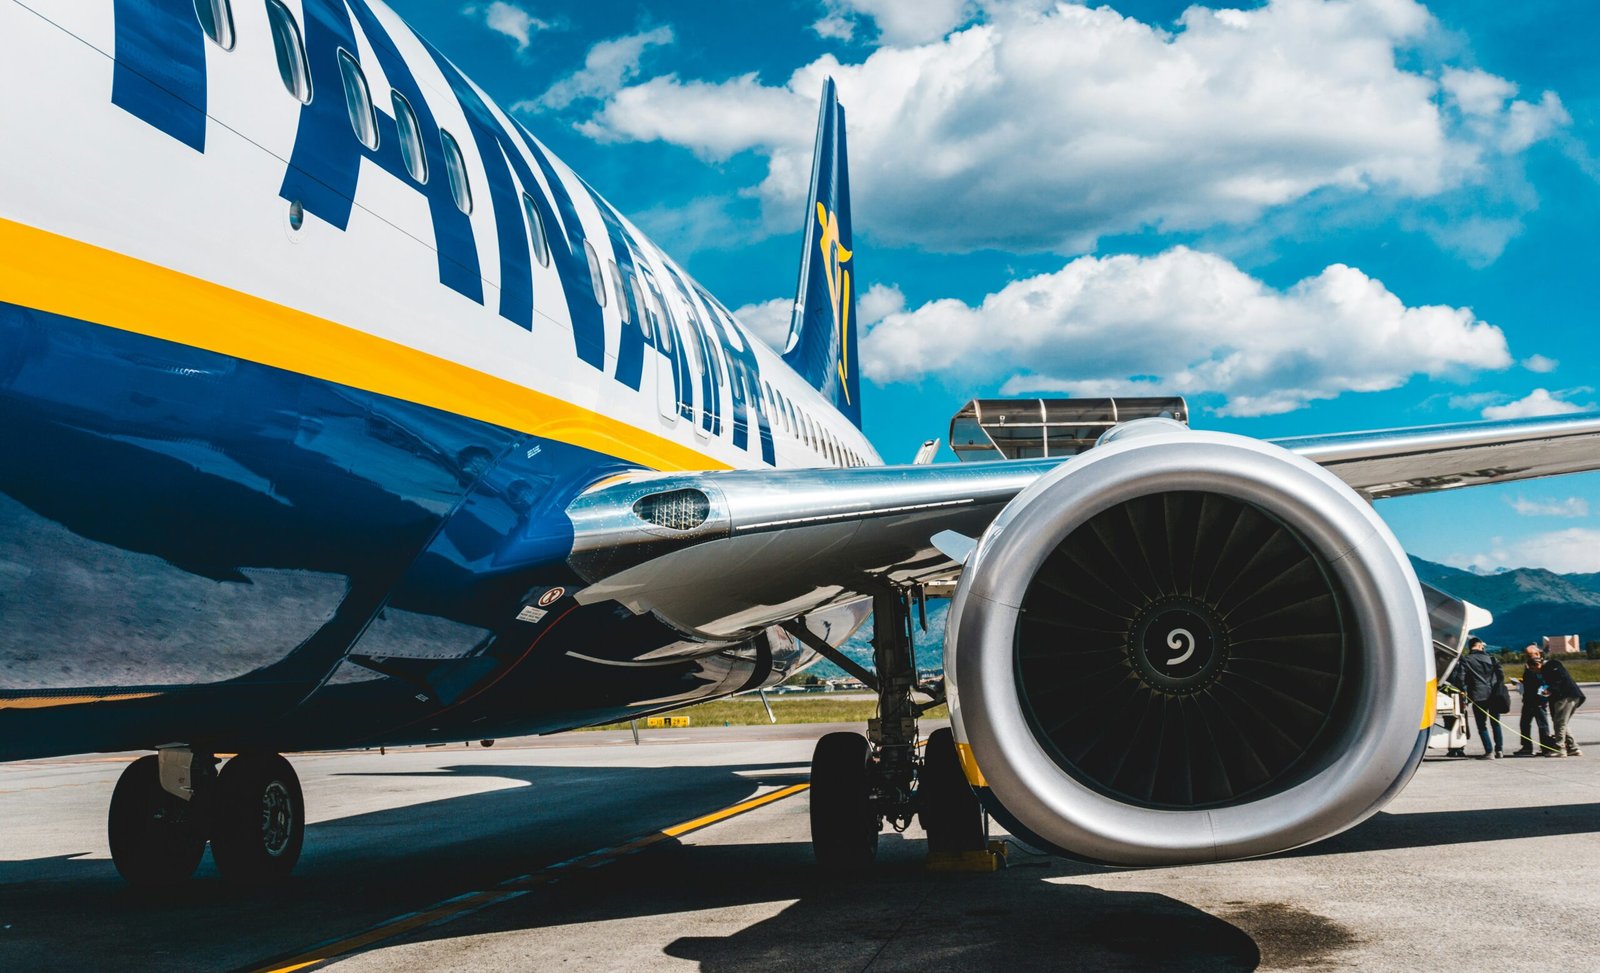 Ryanair Expands Routes and Fleet in Liverpool